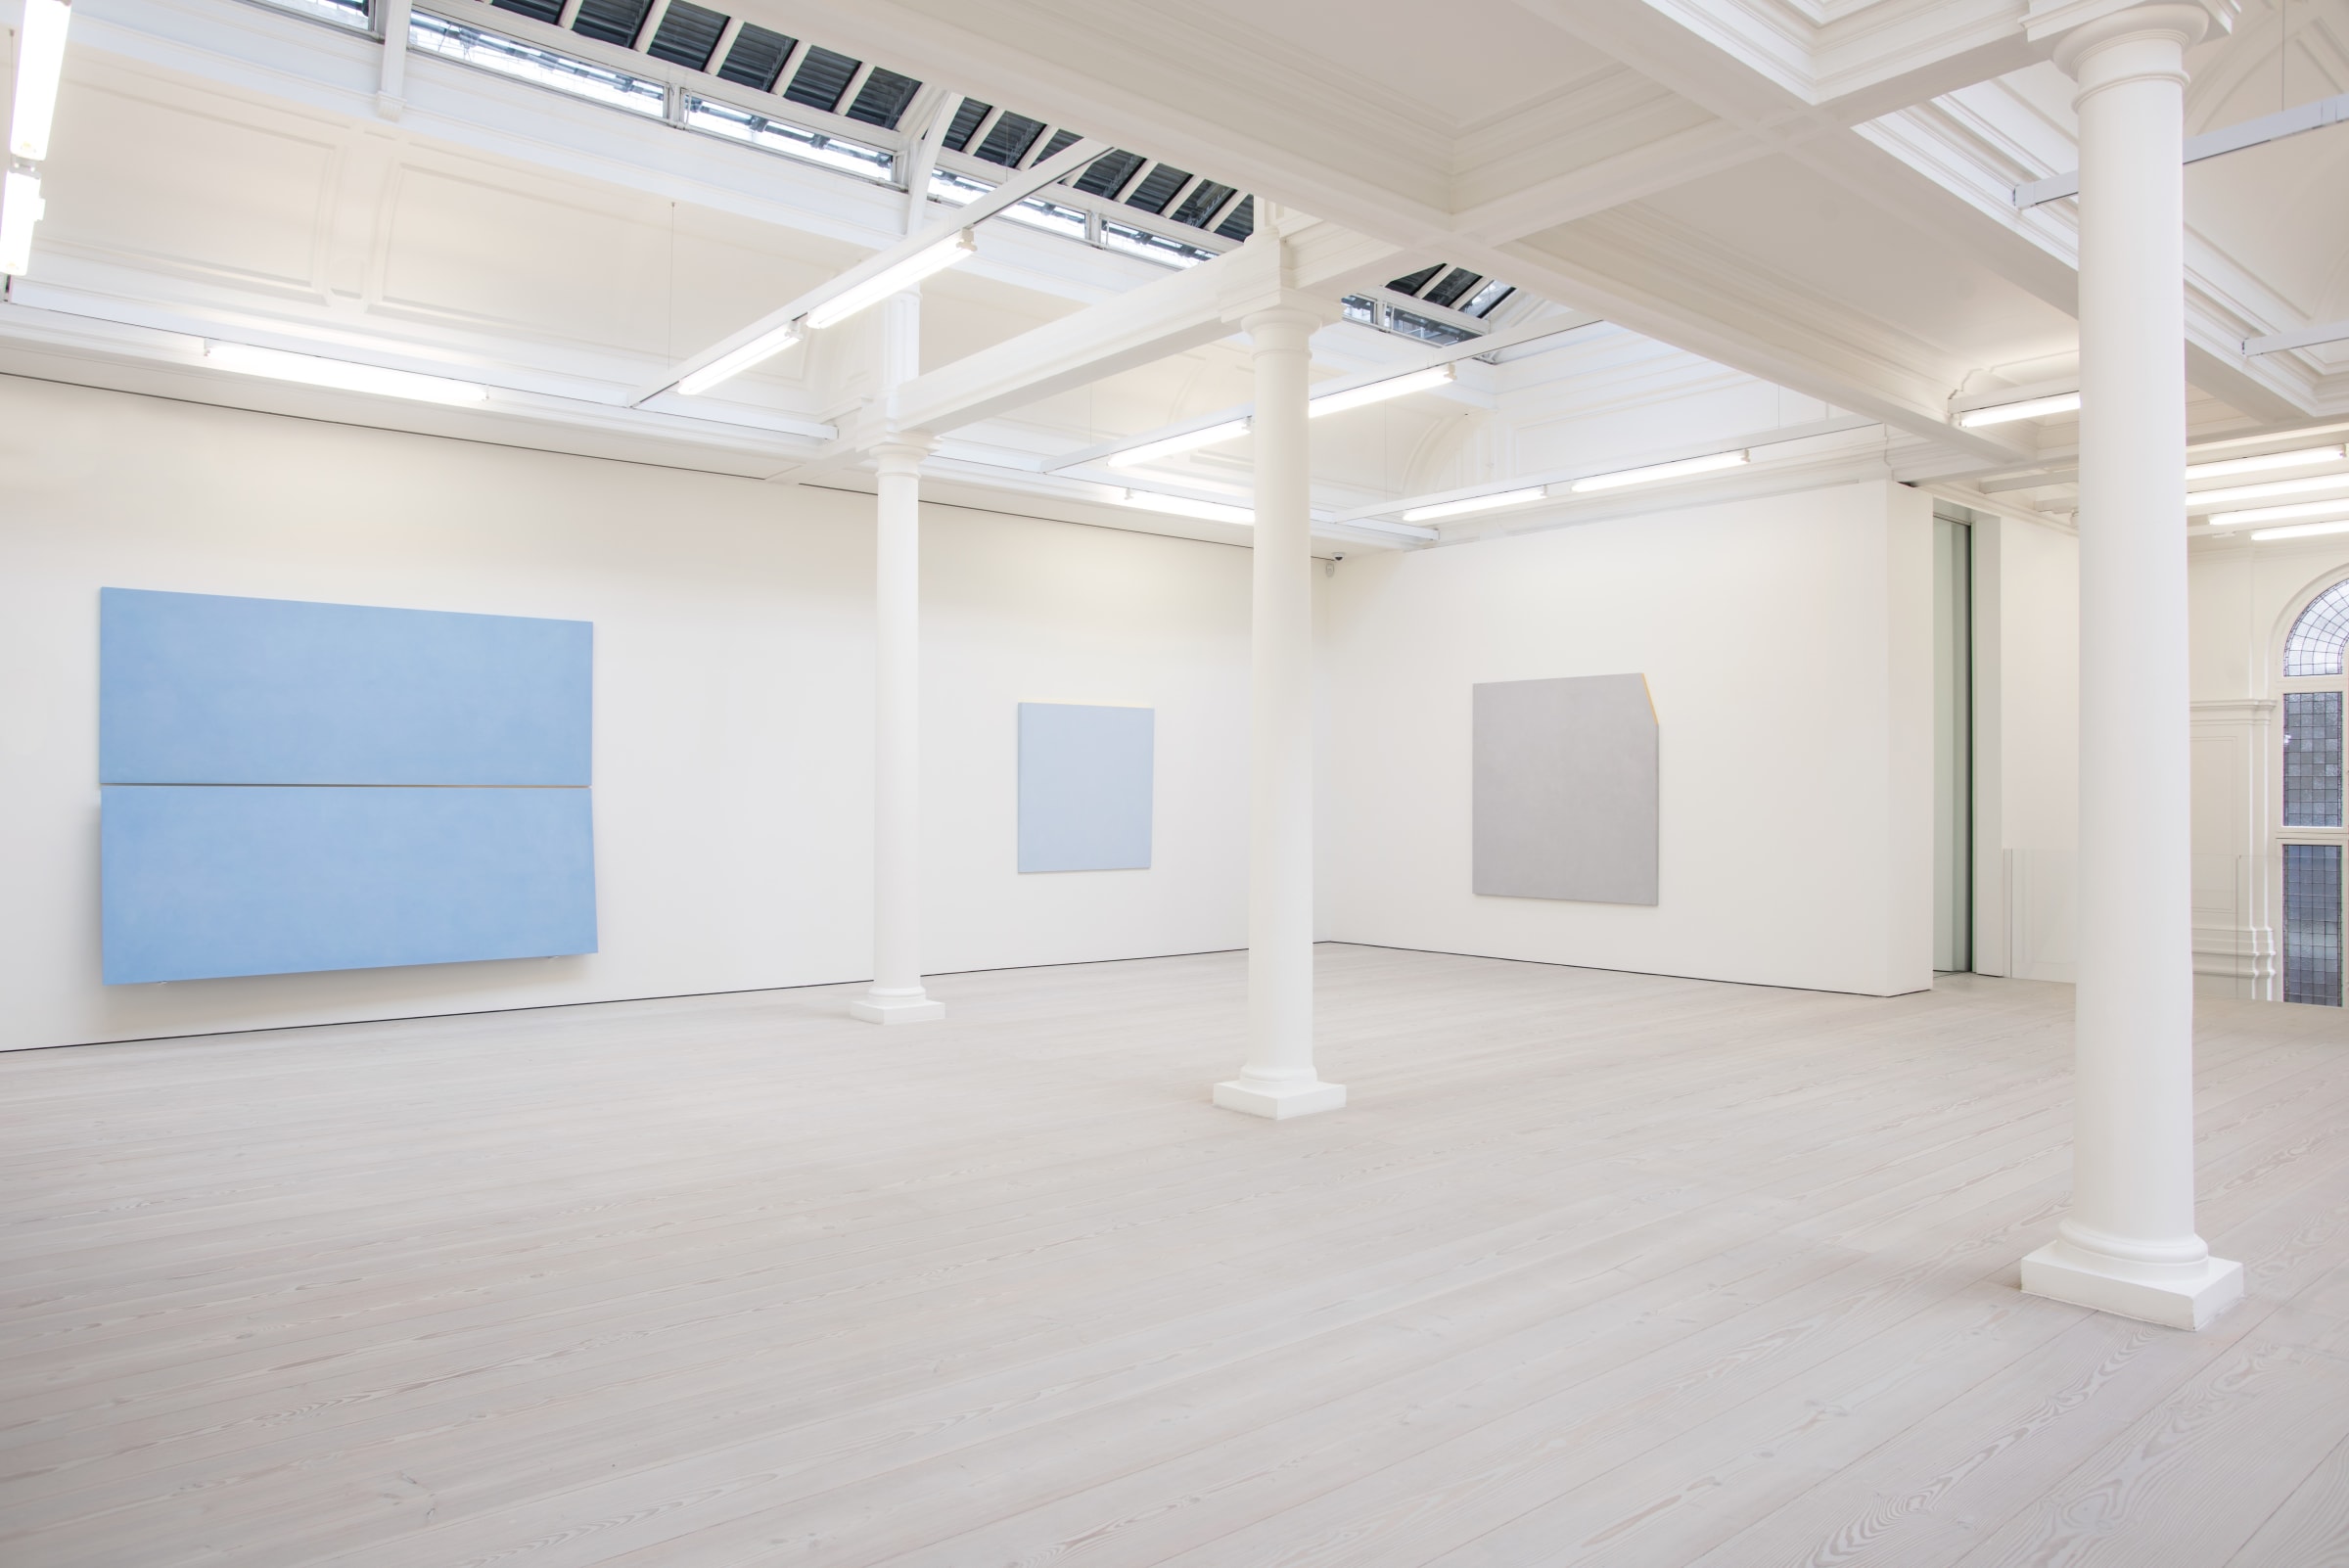 In a large white space with columns, two large light blue paintings hang, with one light grey painting.